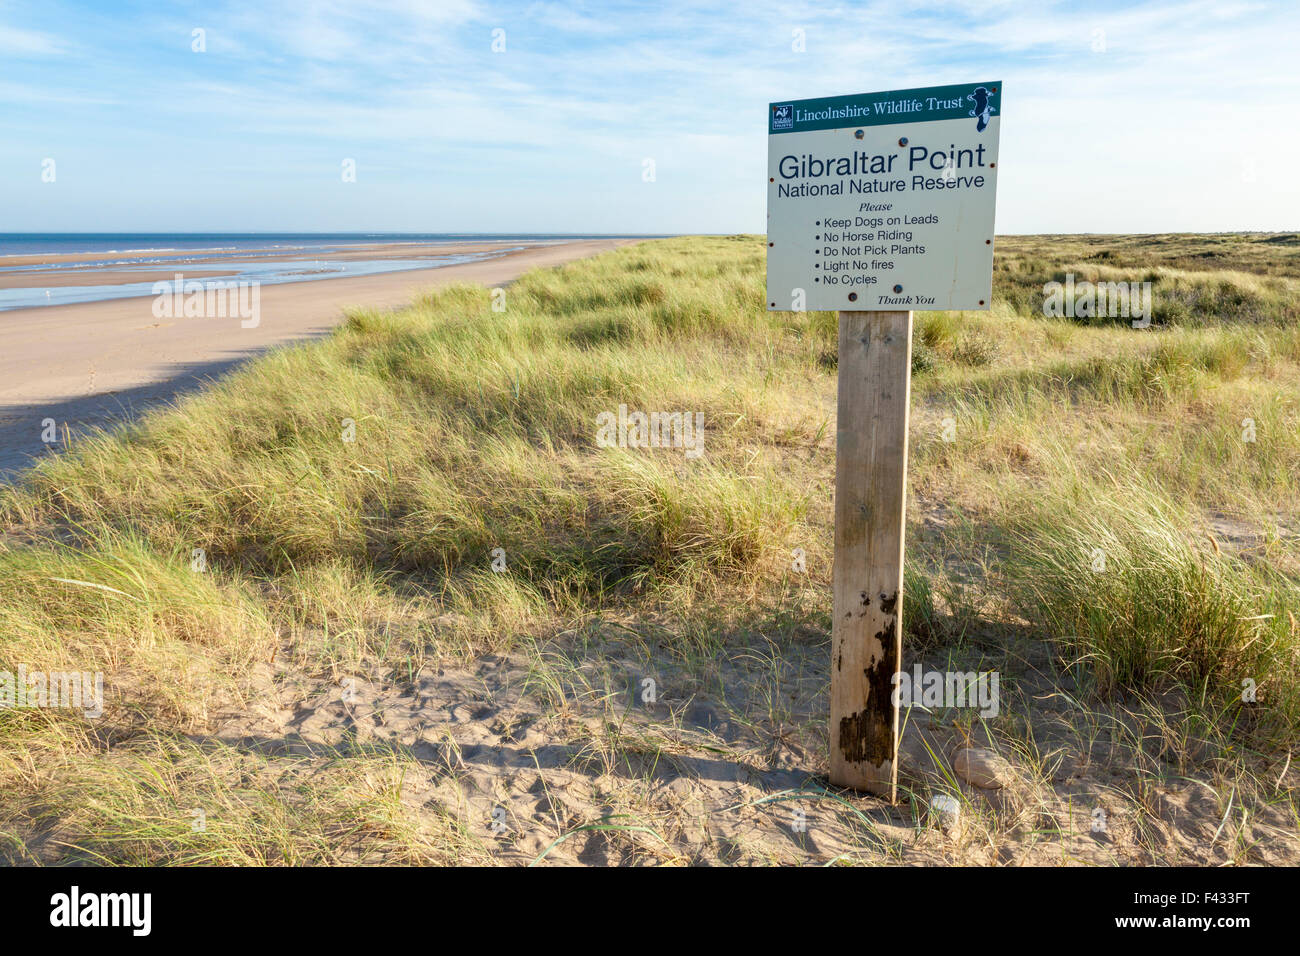 Sign at Gibraltar Point National Nature Reserve, Lincolnshire Coast, England, UK Stock Photo